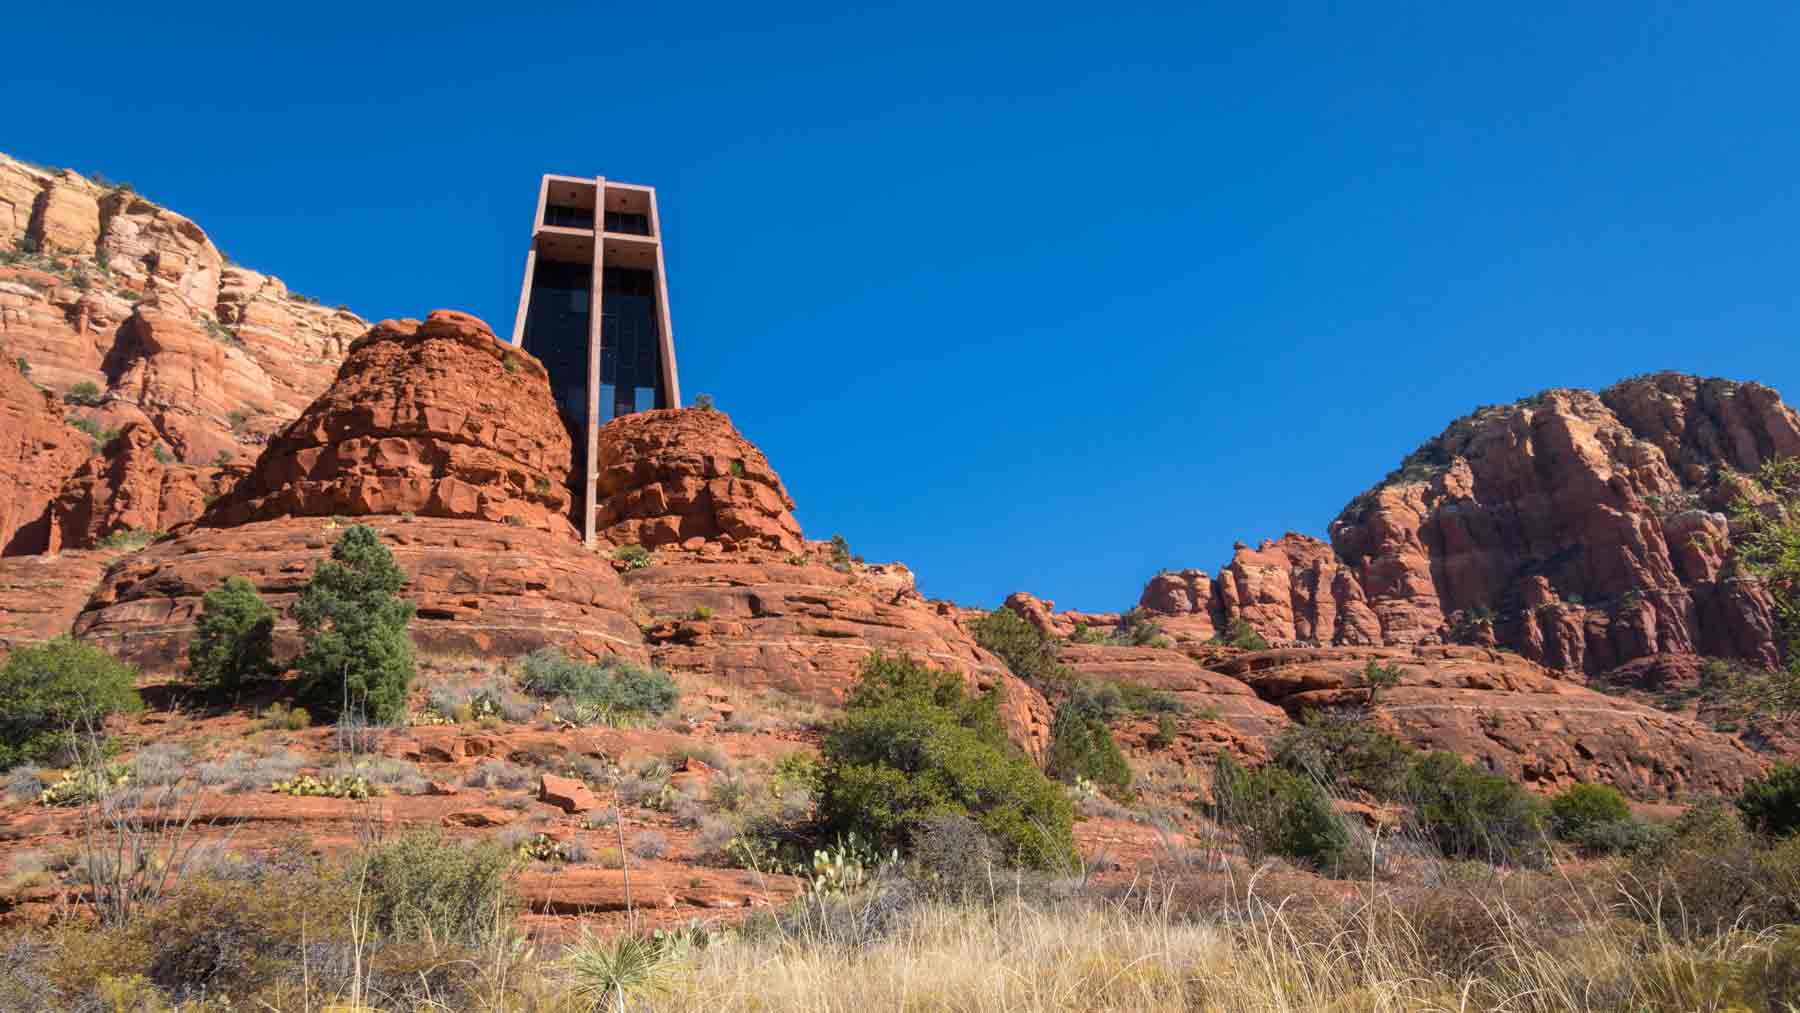 Simple & striking architecture of the Chapel of the Holy Cross in Sedona